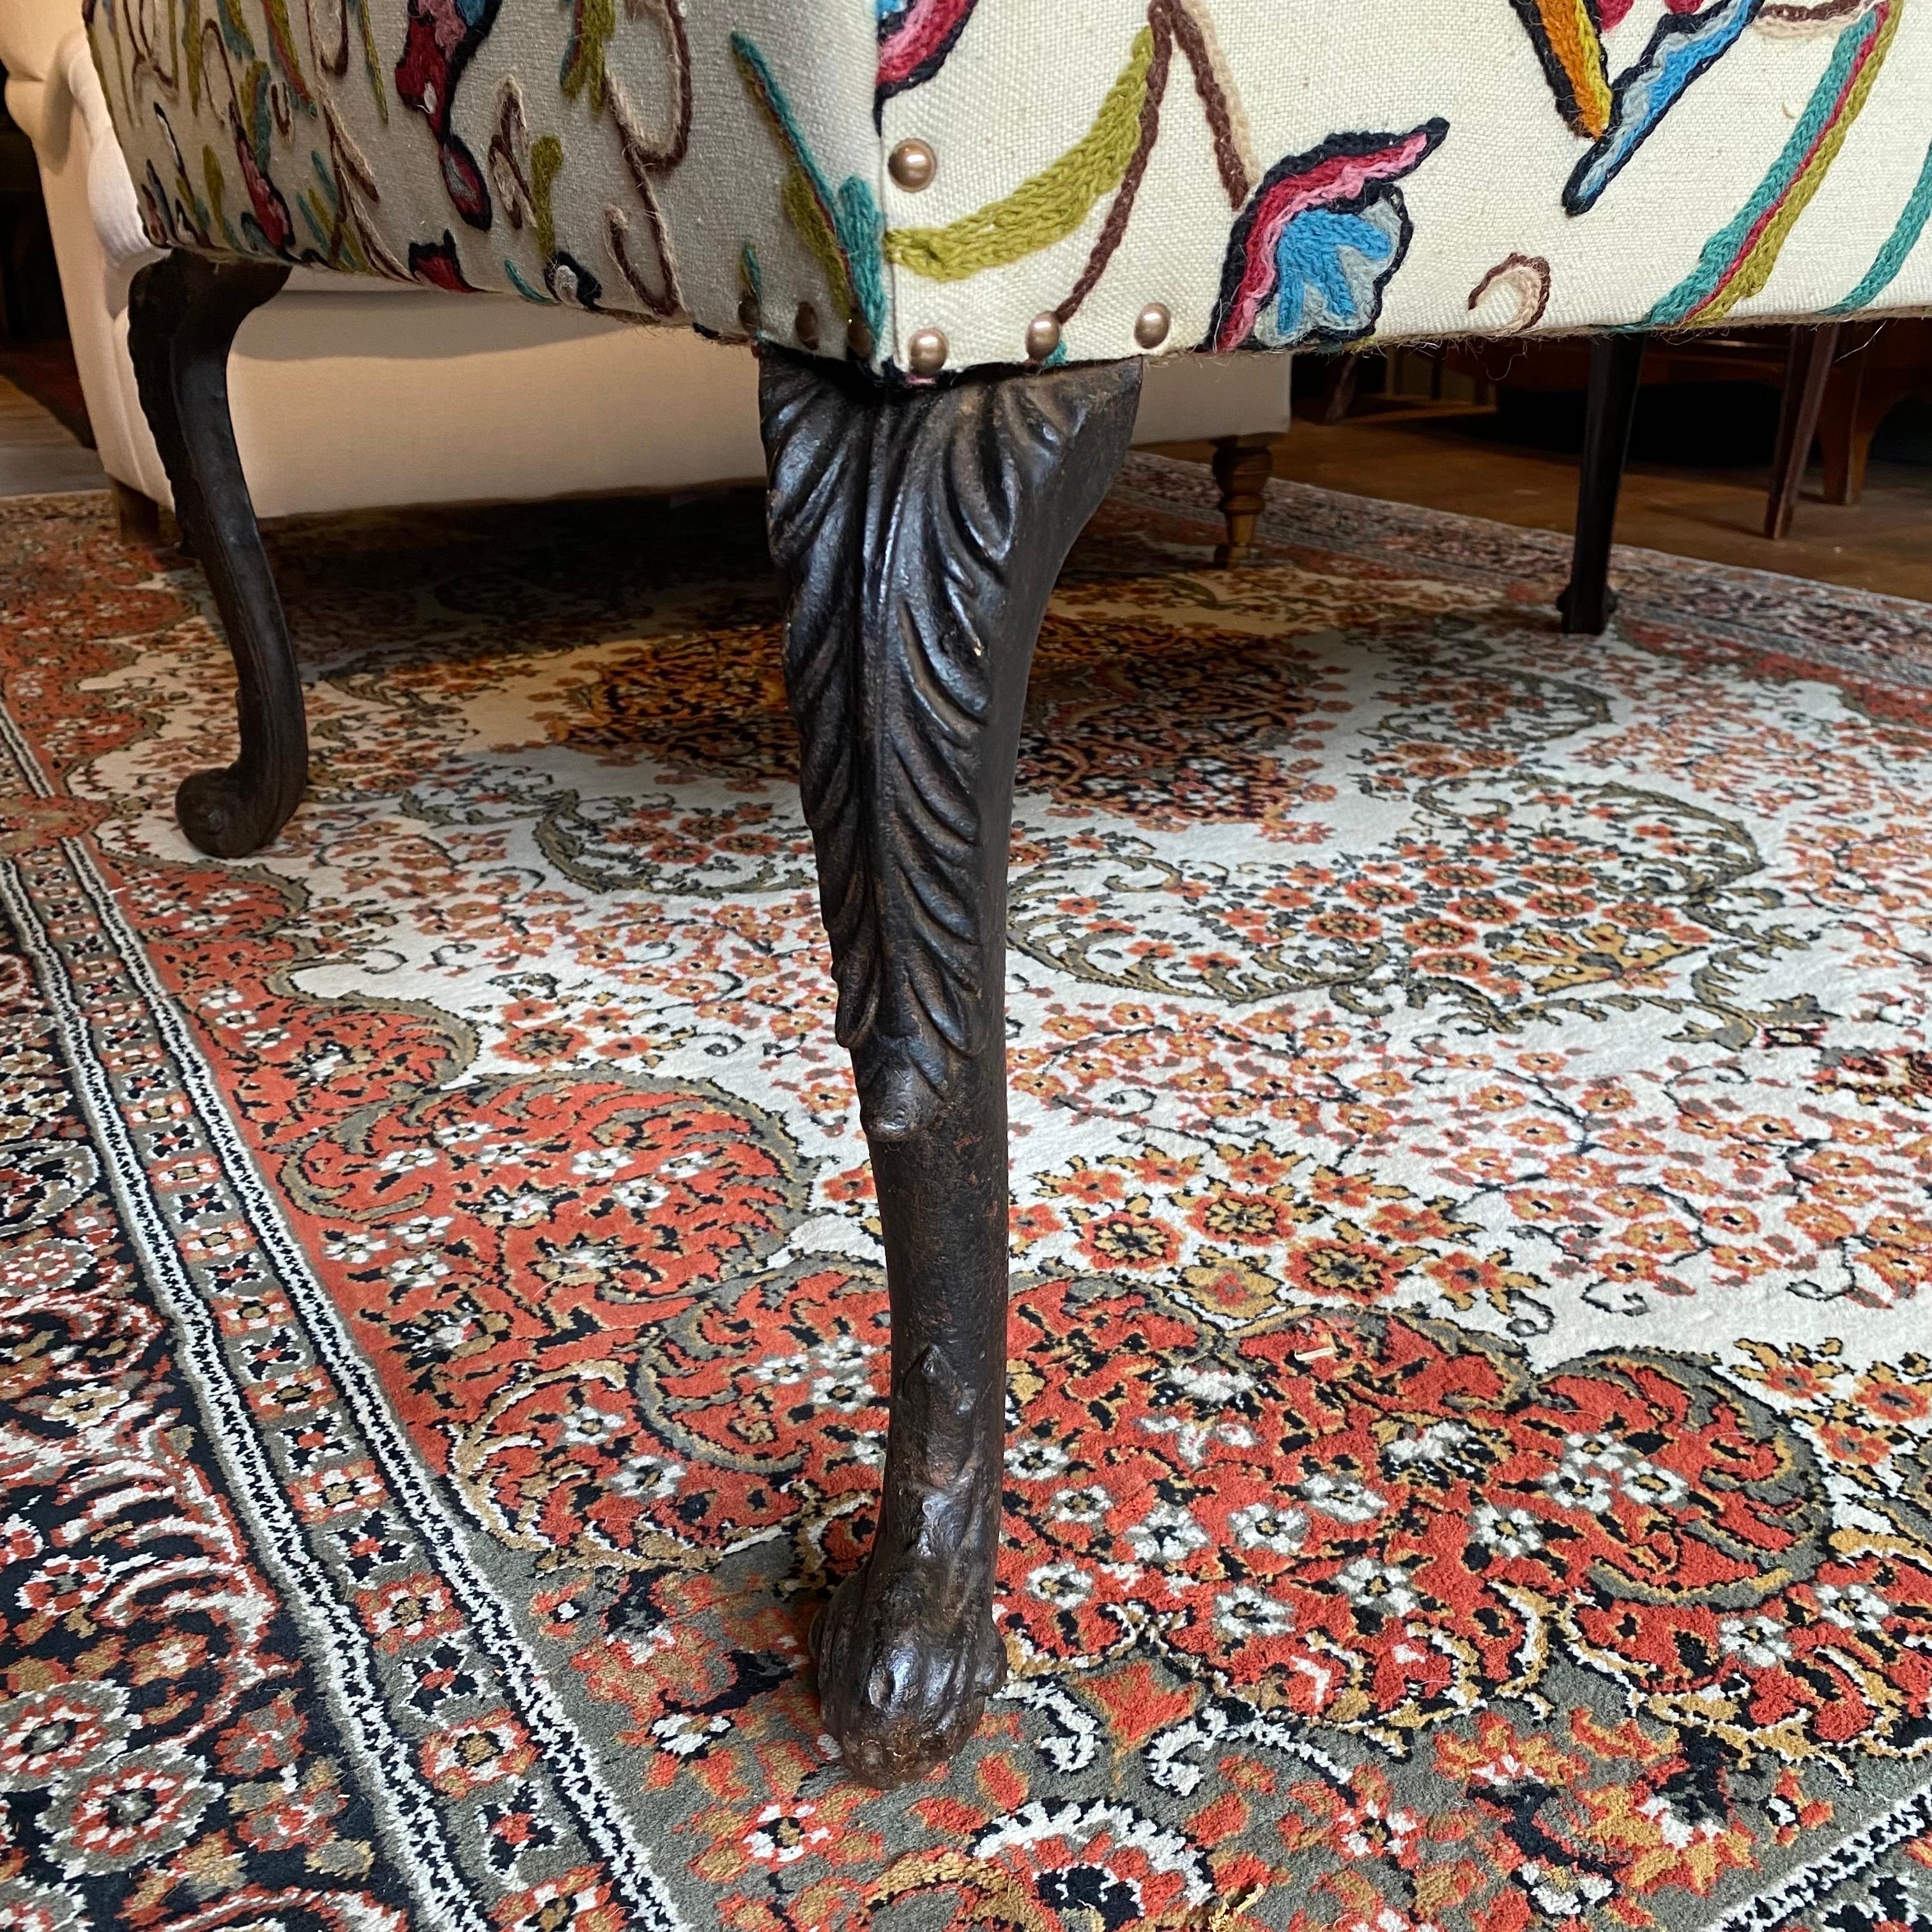 British Bespoke Footstool / Ottoman with Antique Cast Iron Legs and Vintage Crewel Work